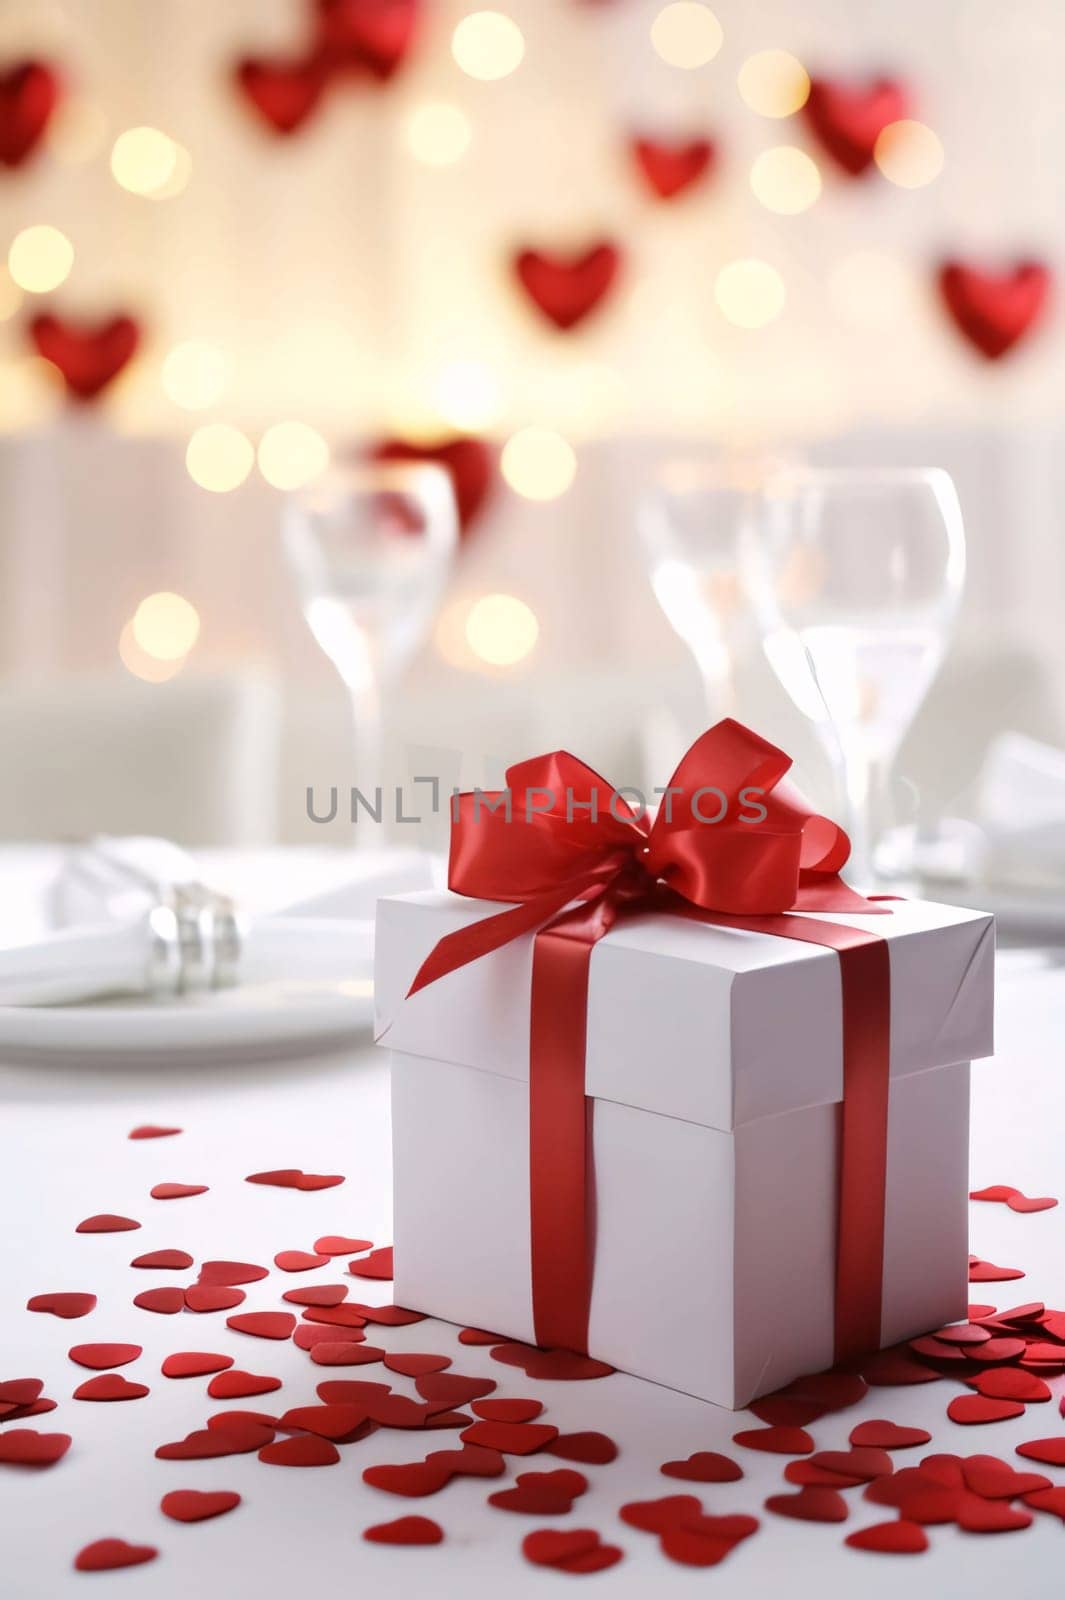 A white gift, a box with a red bow around scattered red hearts, glasses, a plate, a romantic dinner. Gifts as a day symbol of present and love. A time of falling in love and love.